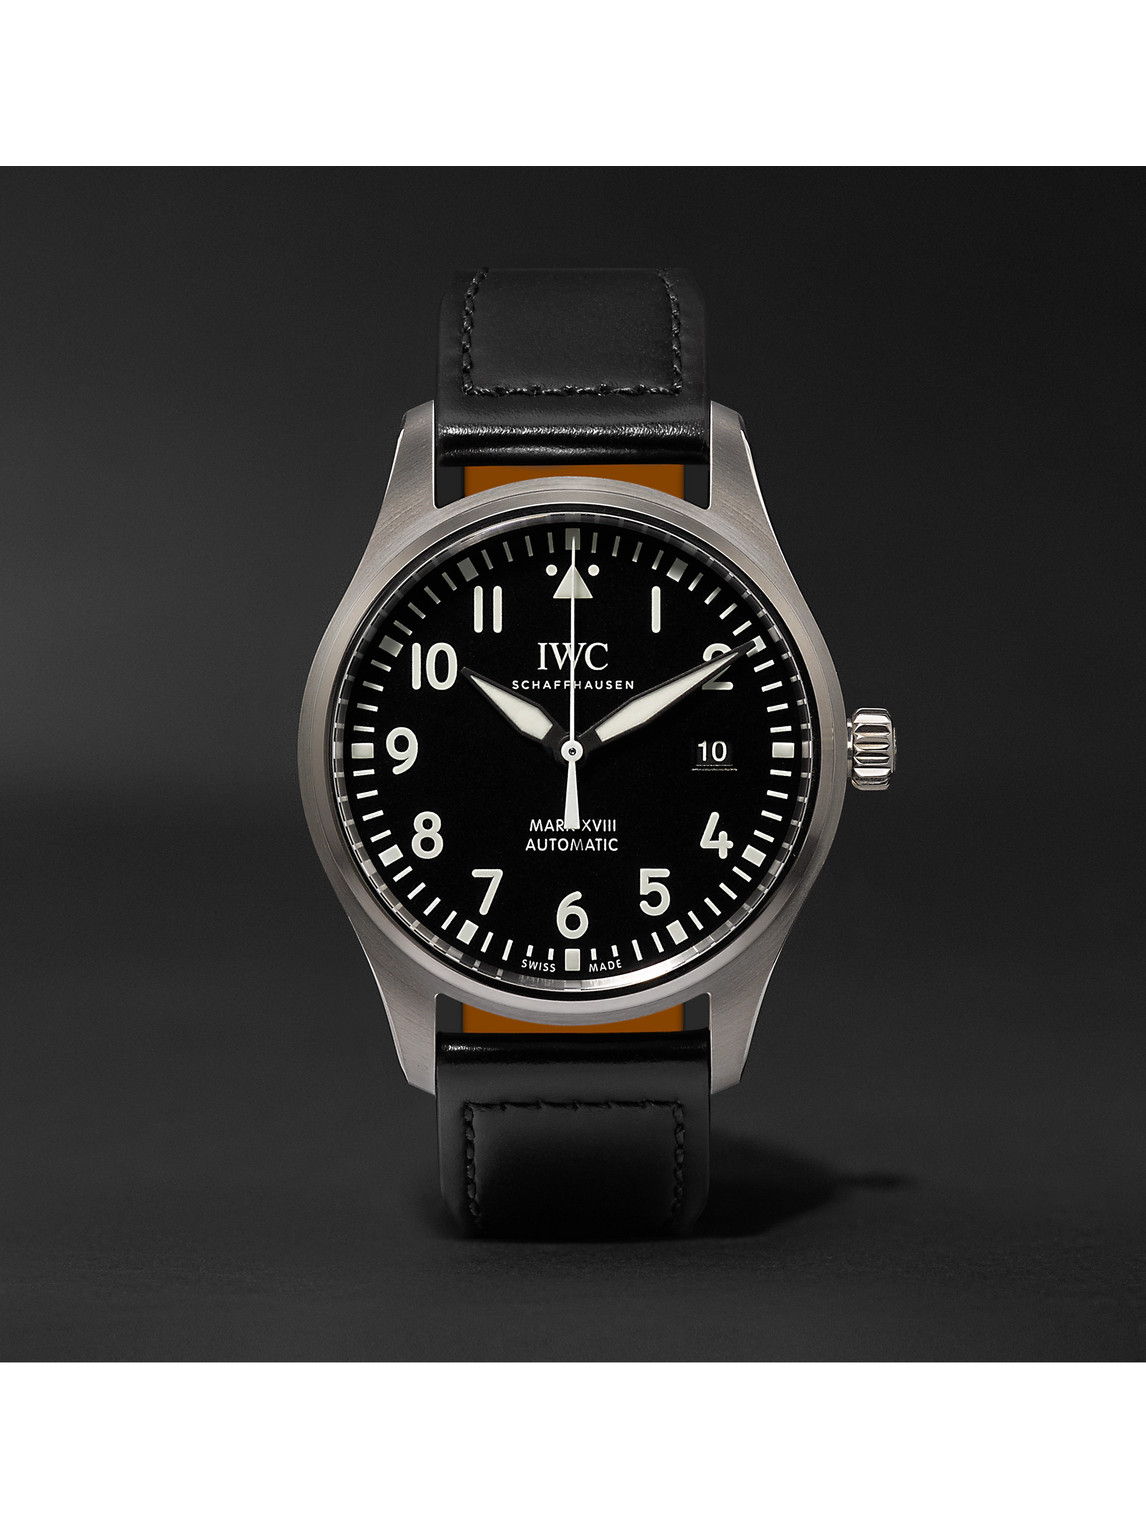 Pilot's Mark XVIII Automatic 40mm Stainless Steel and Leather Watch, Ref. No. IW327009